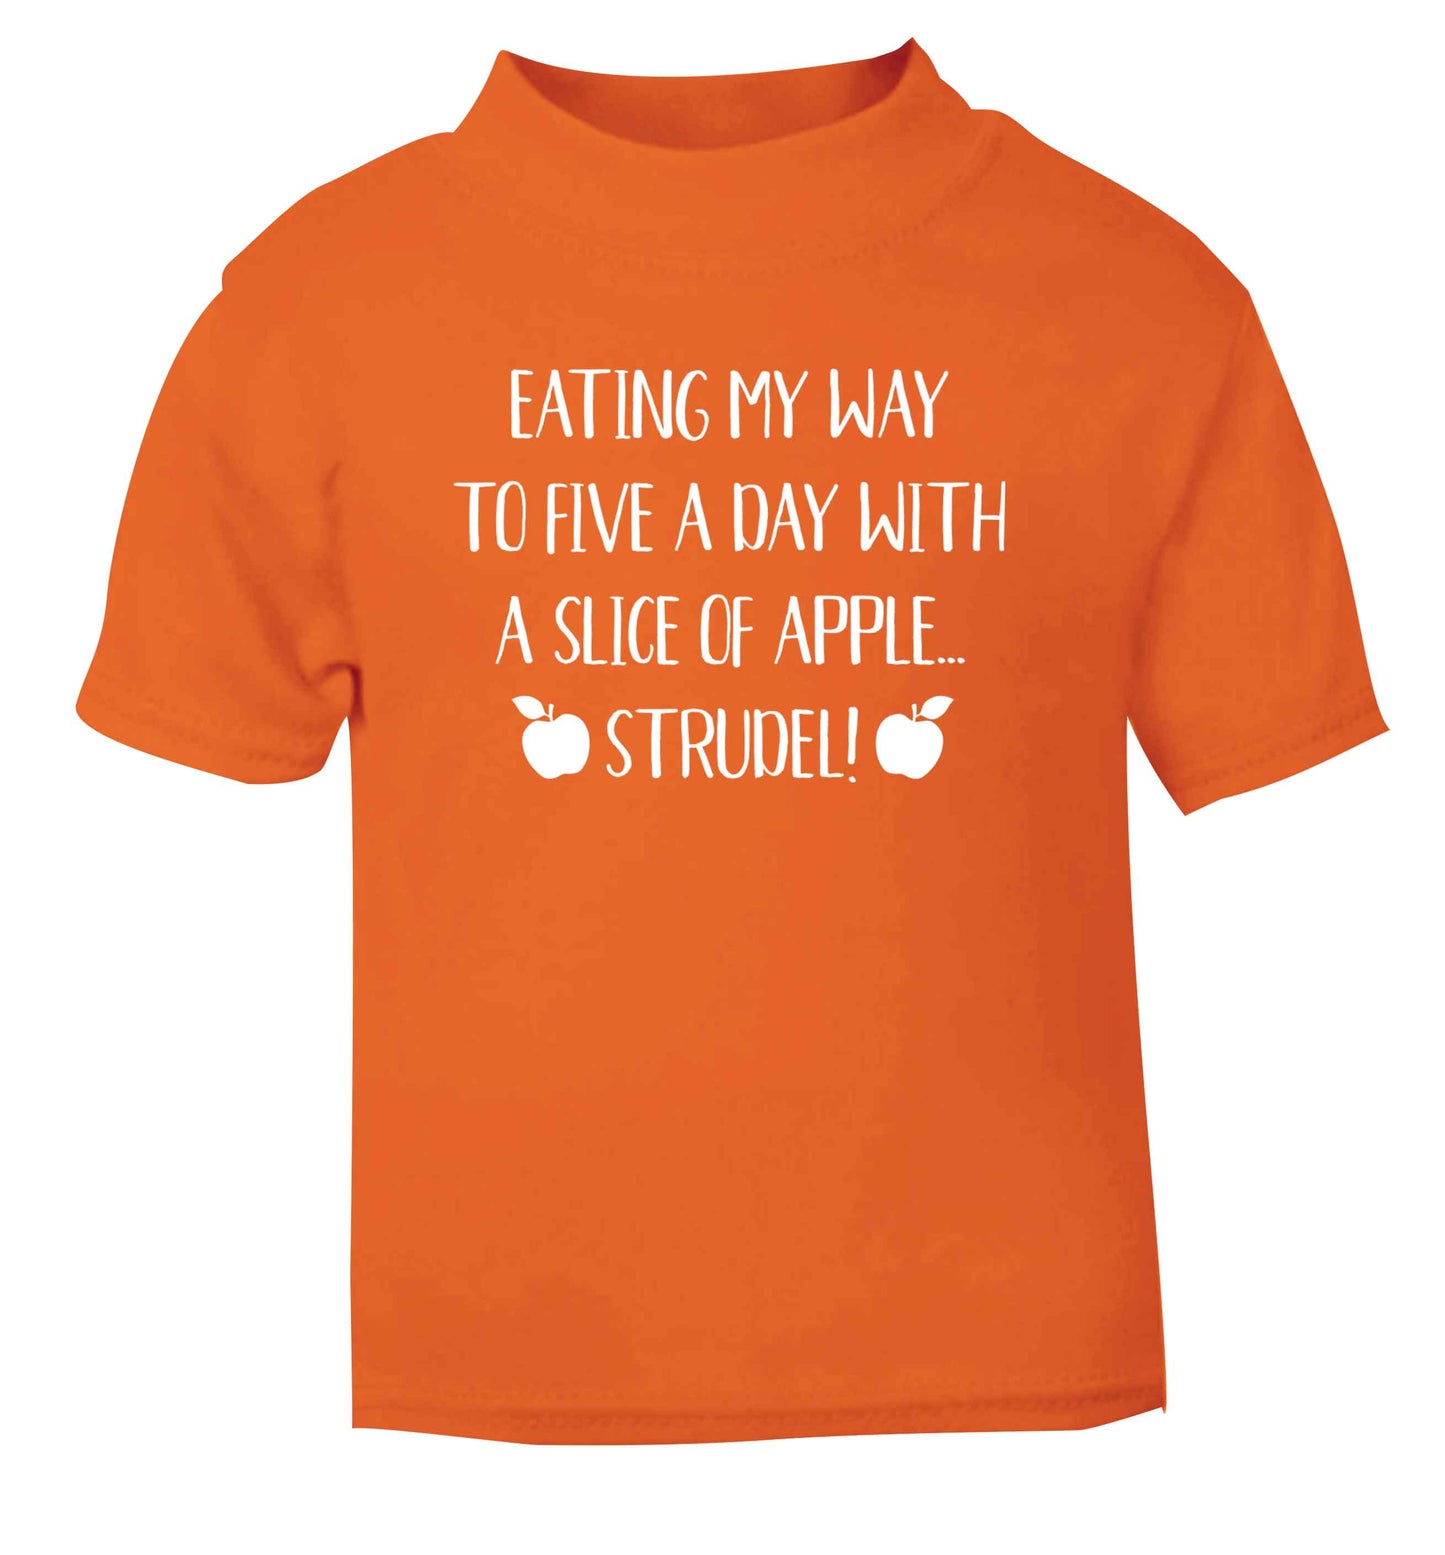 Eating my way to five a day with a slice of apple strudel orange Baby Toddler Tshirt 2 Years